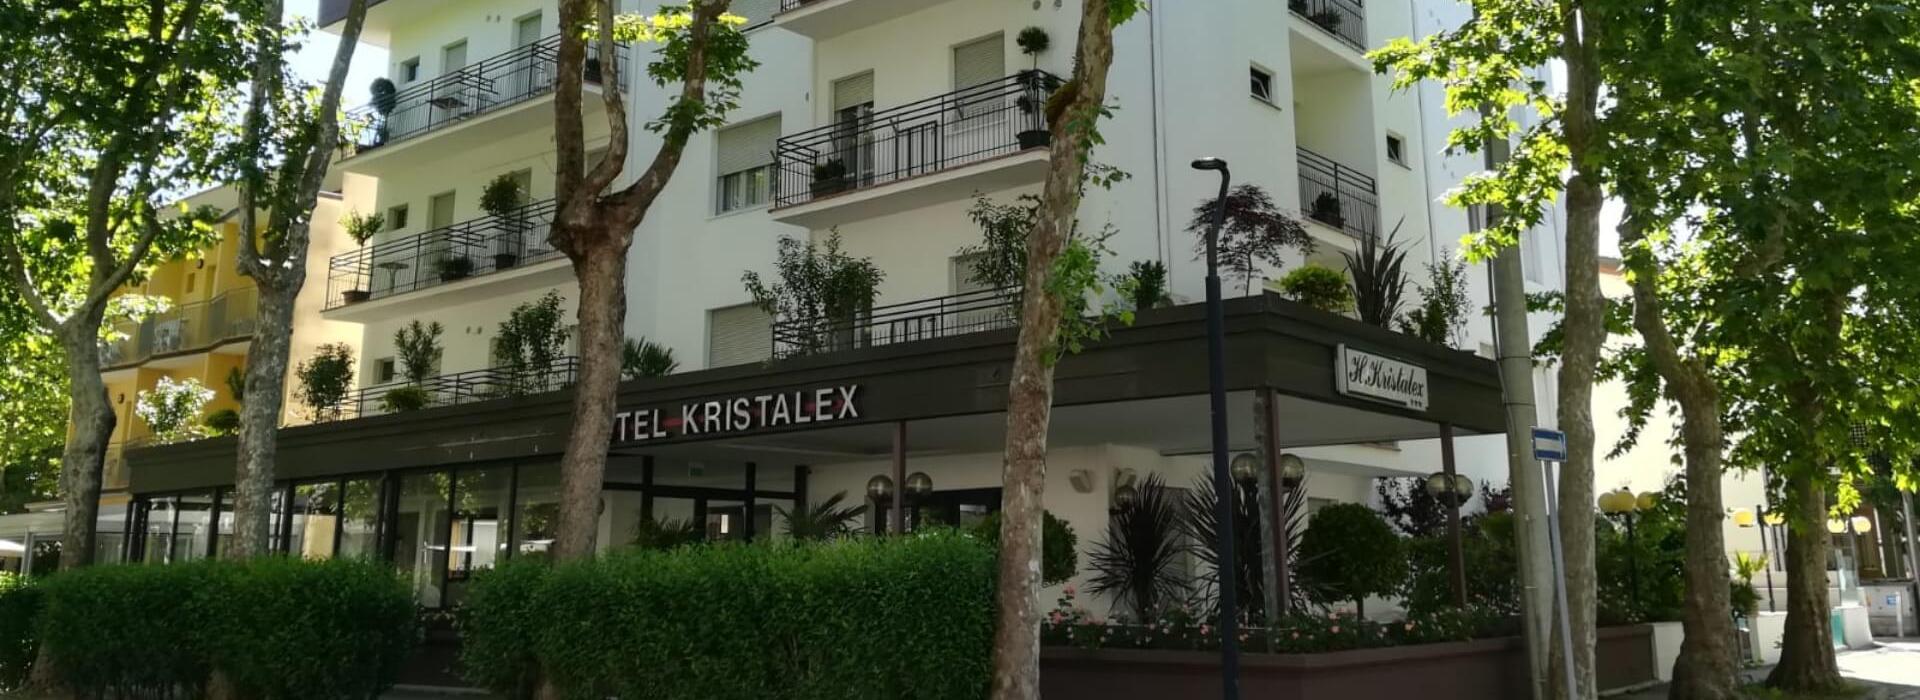 hotelkristalex en september-special-relax-by-the-sea-in-a-3-star-hotel-in-cesenatico 017